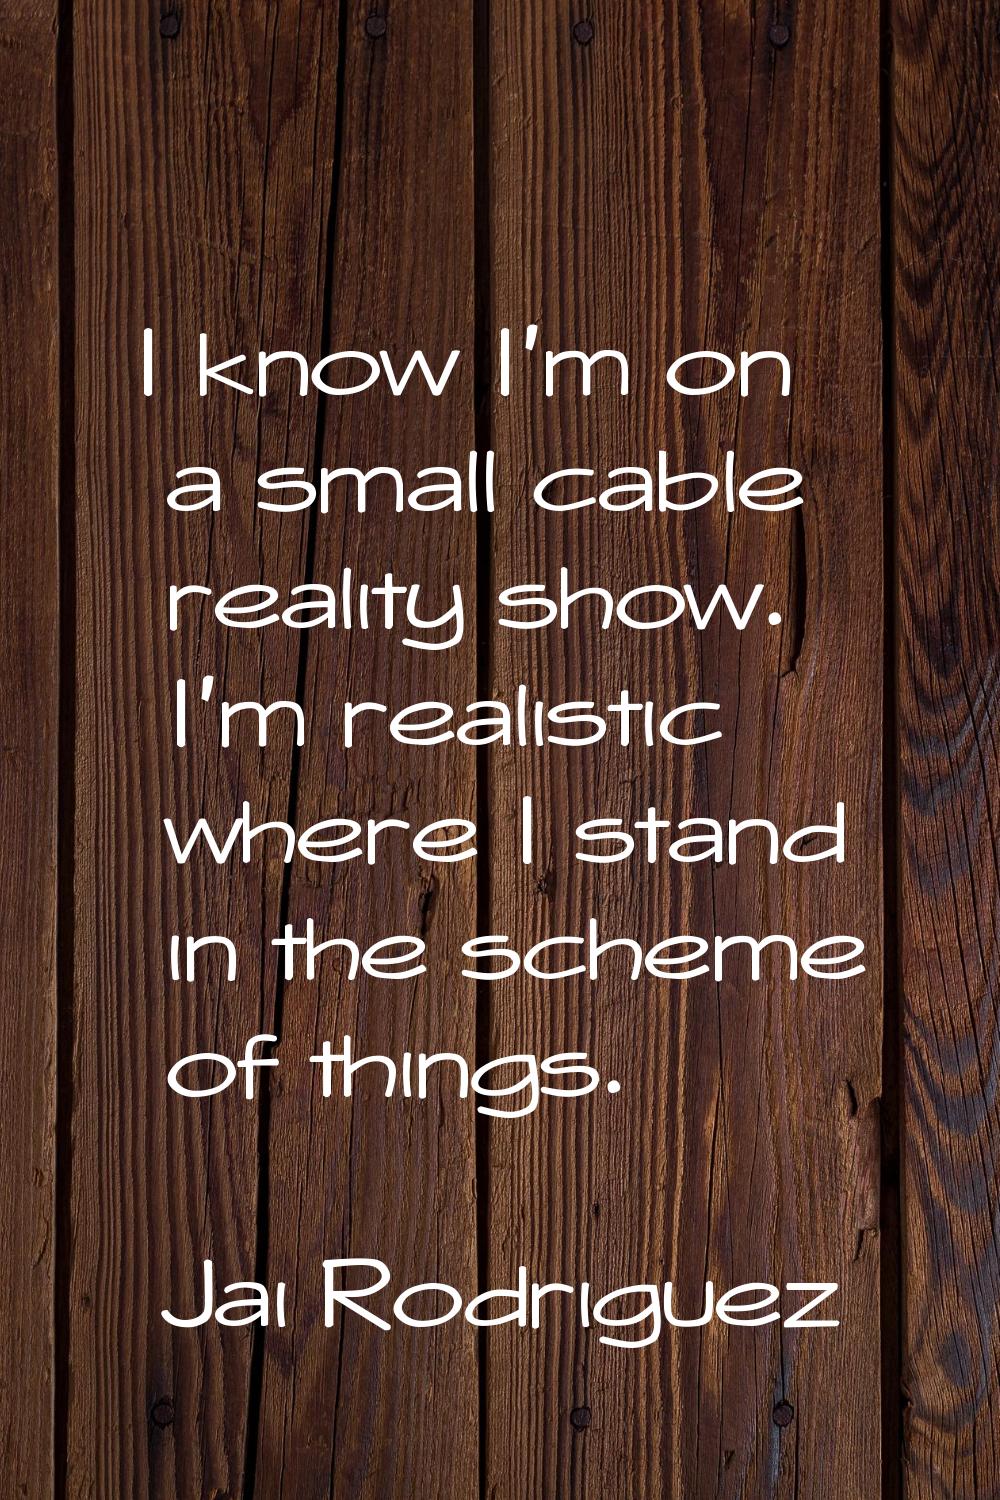 I know I'm on a small cable reality show. I'm realistic where I stand in the scheme of things.